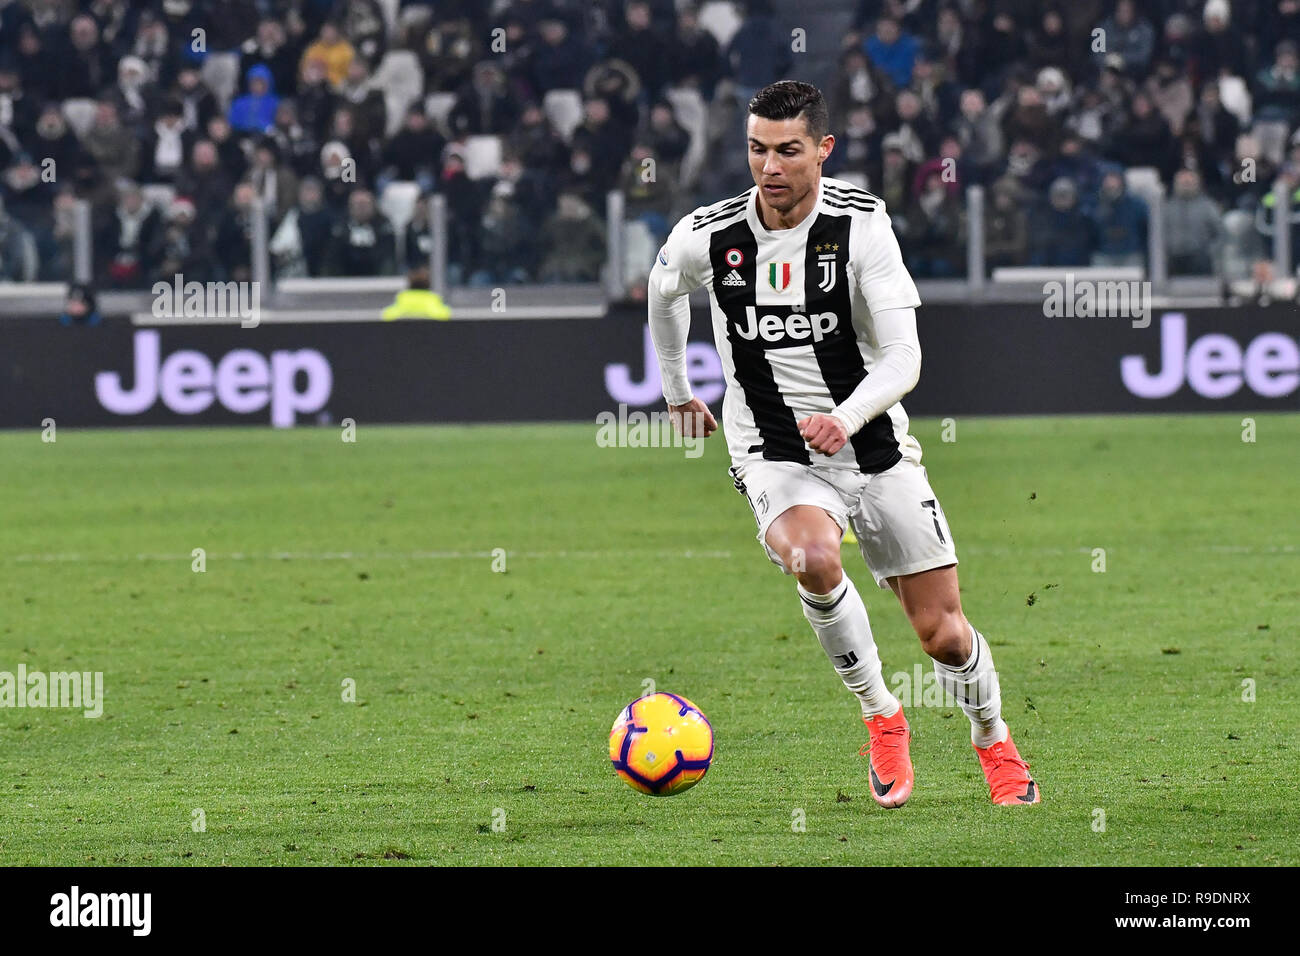 Turin, Italy. 22nd Dec, 2018. Cristiano Ronaldo (Juventus FC) during the  Serie A football match between Juventus FC and AS Roma at Allianz Stadium  on 22th Dicember, 2018 in Turin, Italy. Credit: